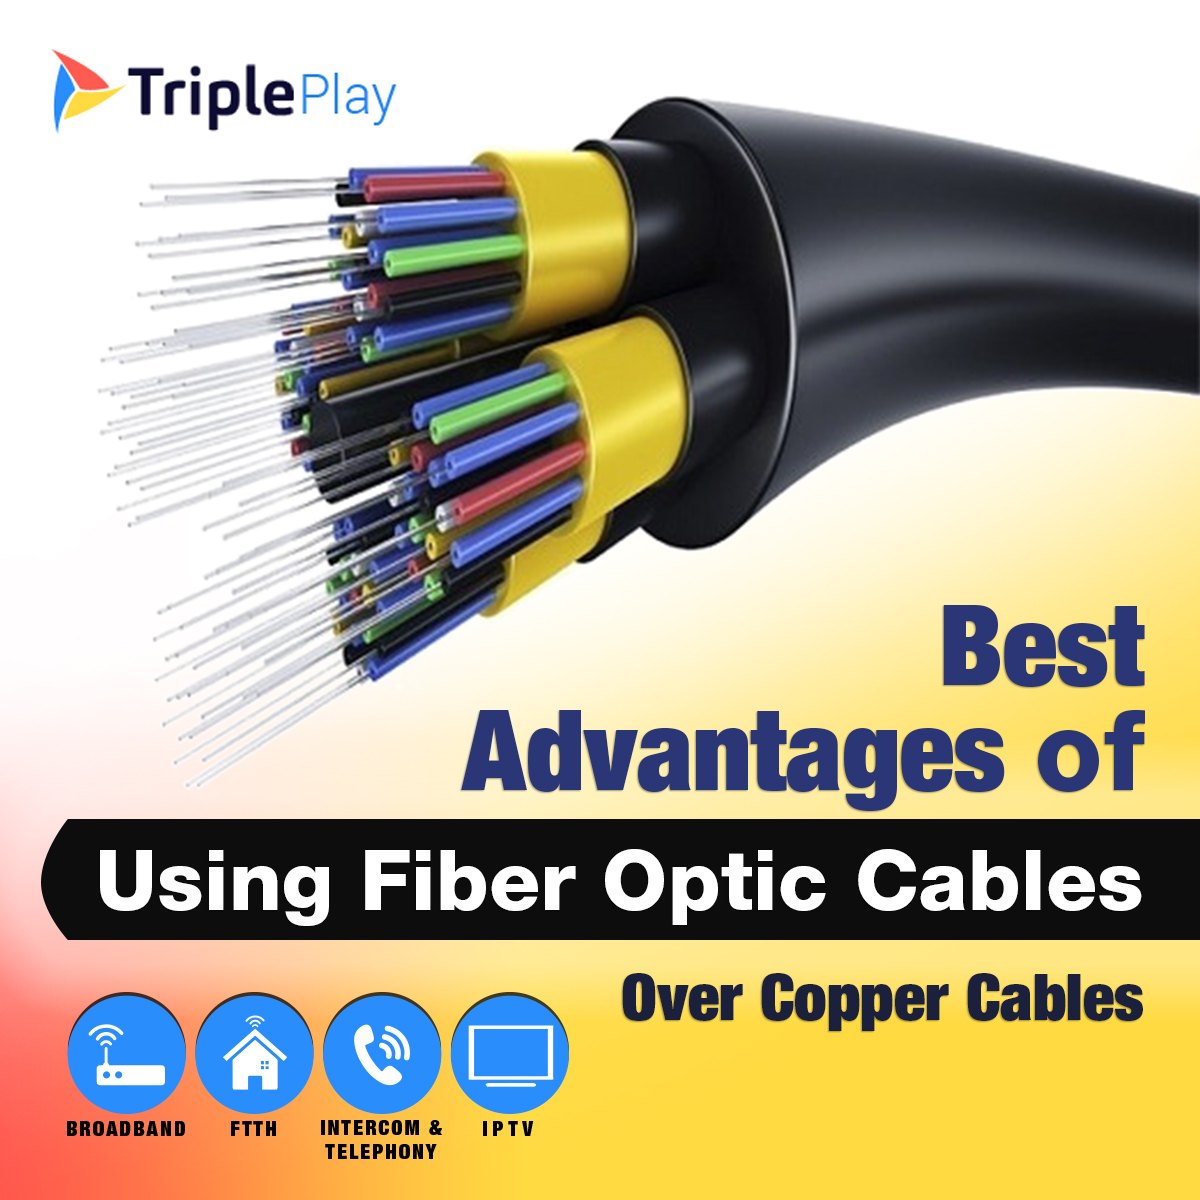 Blog - Boon of Using Fiber Optic Cables Over Copper Cables